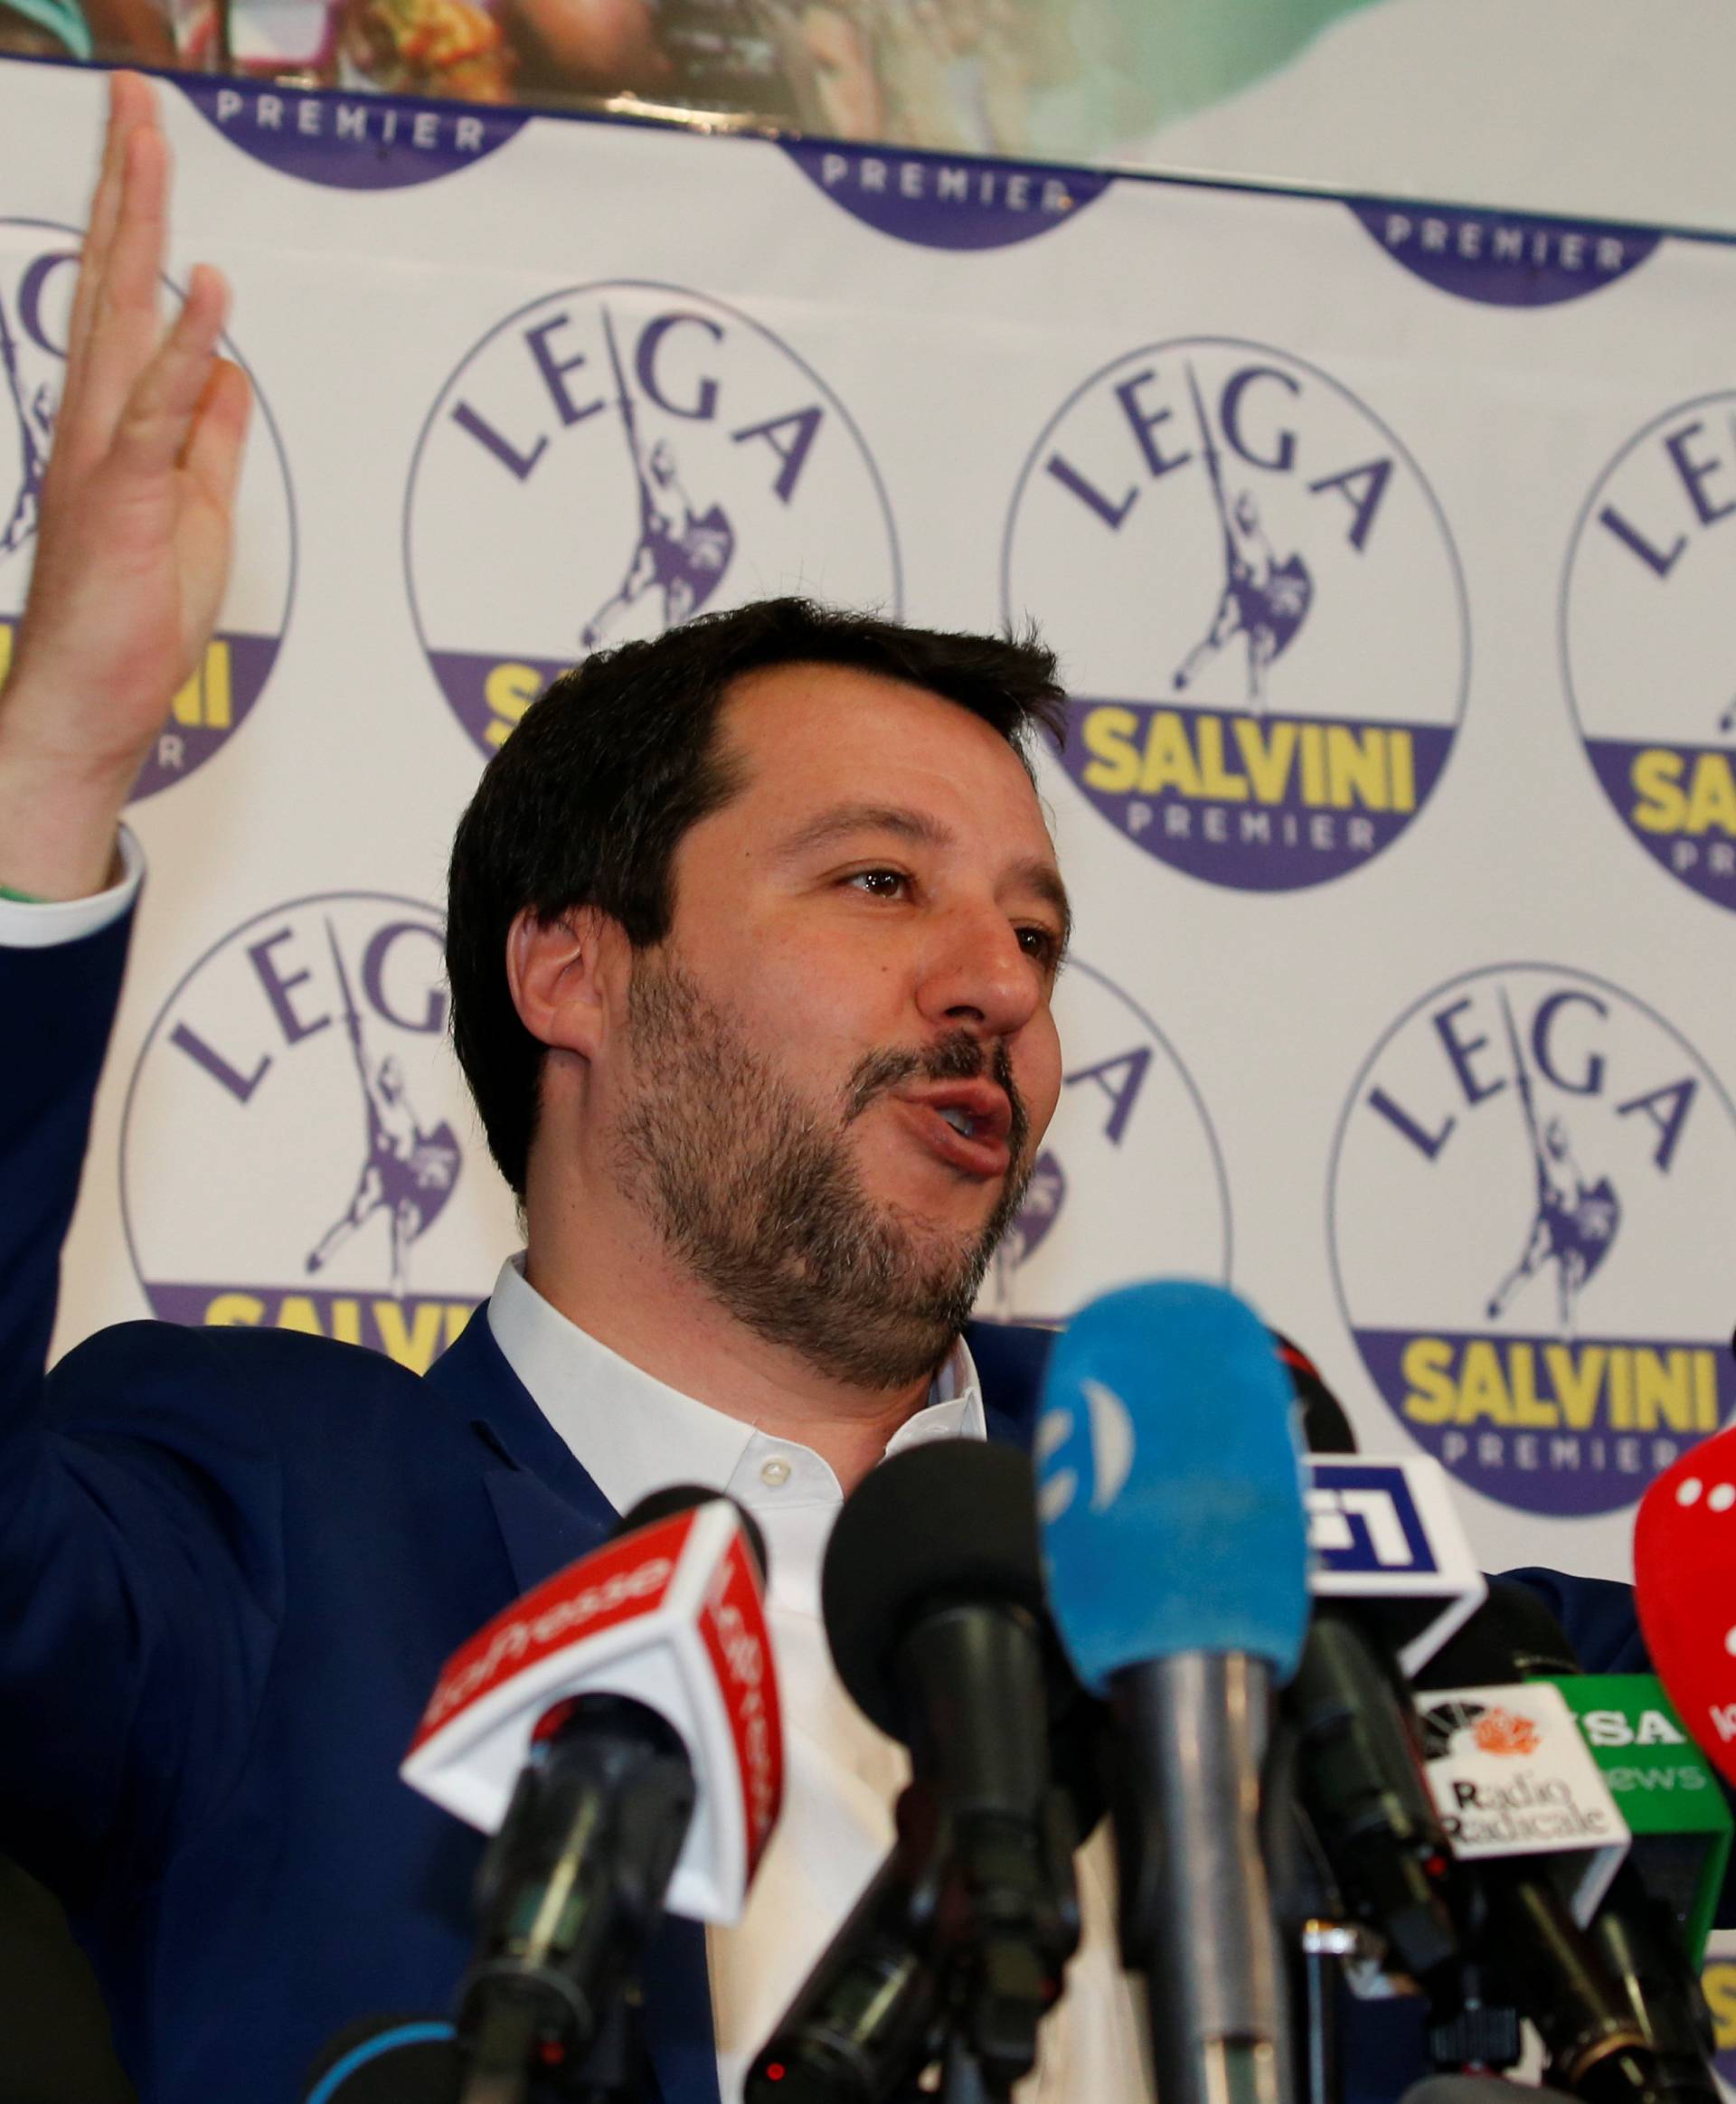 Northern League party leader Matteo Salvini gestures as he talks during a news conference, the day after Italy's parliamentary elections, in Milan